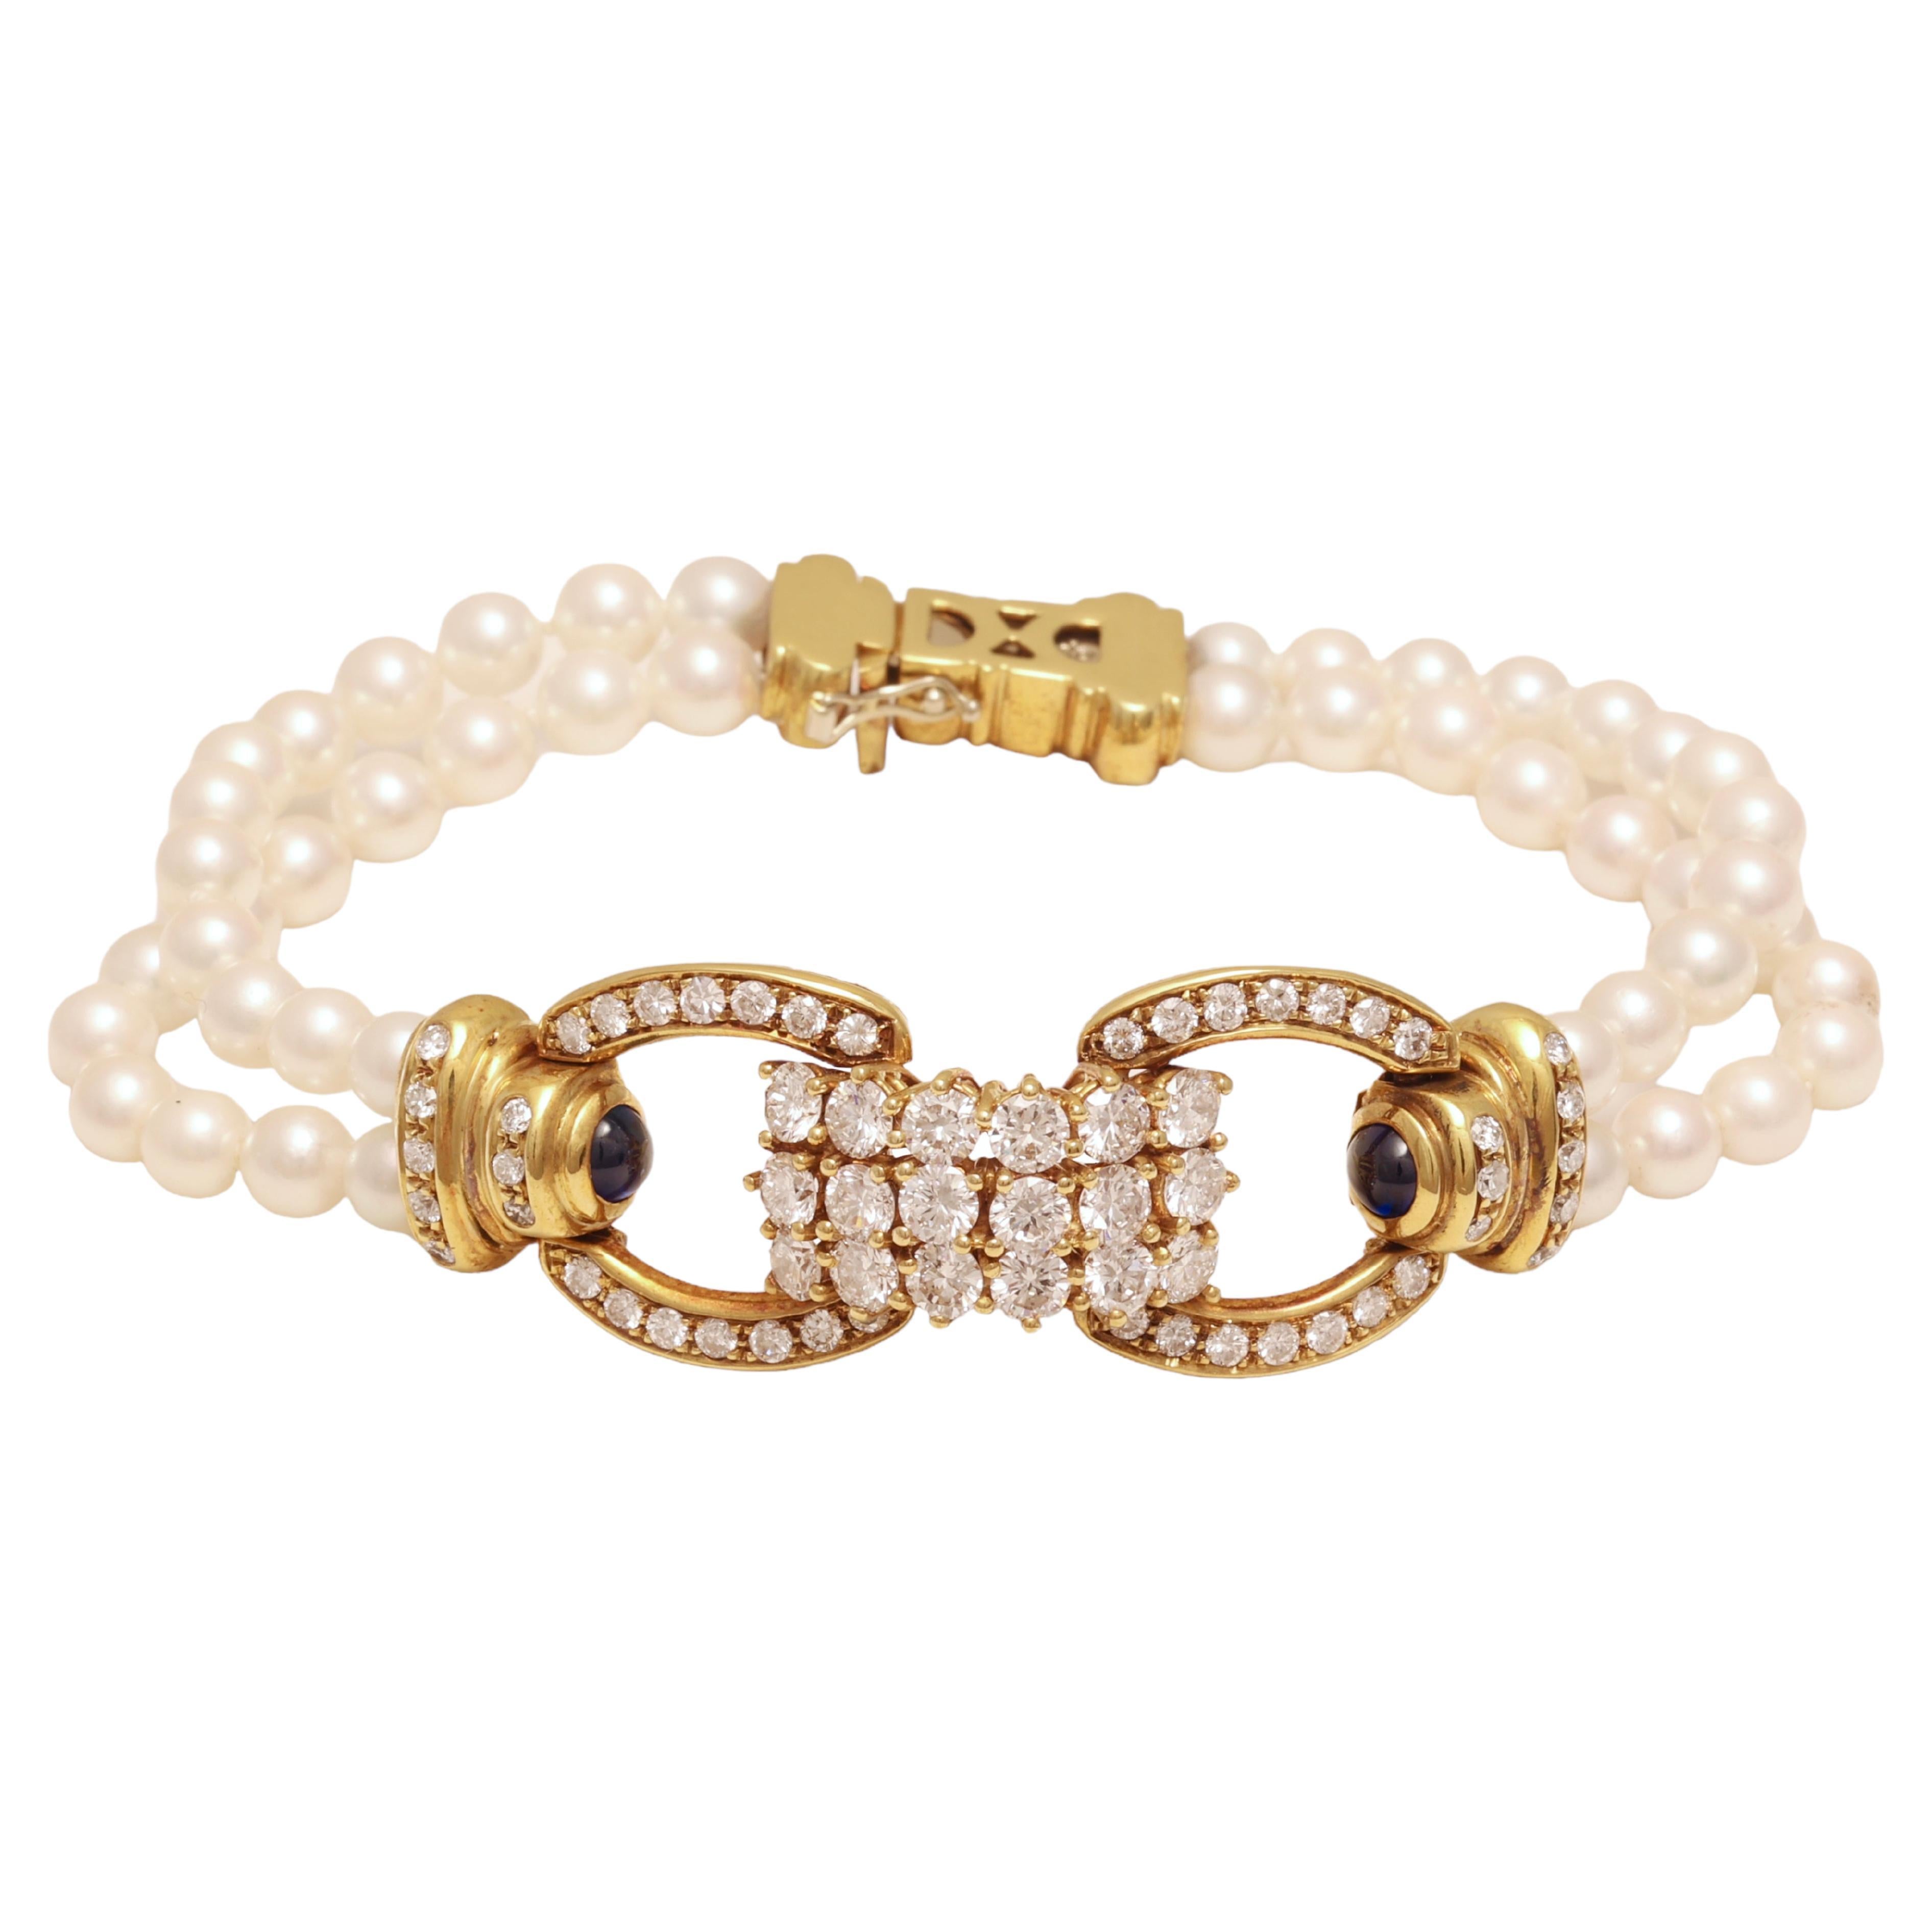 Pearl Bracelet in 18kt Yellow Gold Set With 3.58ct. Diamonds, Pearls & Sapphires